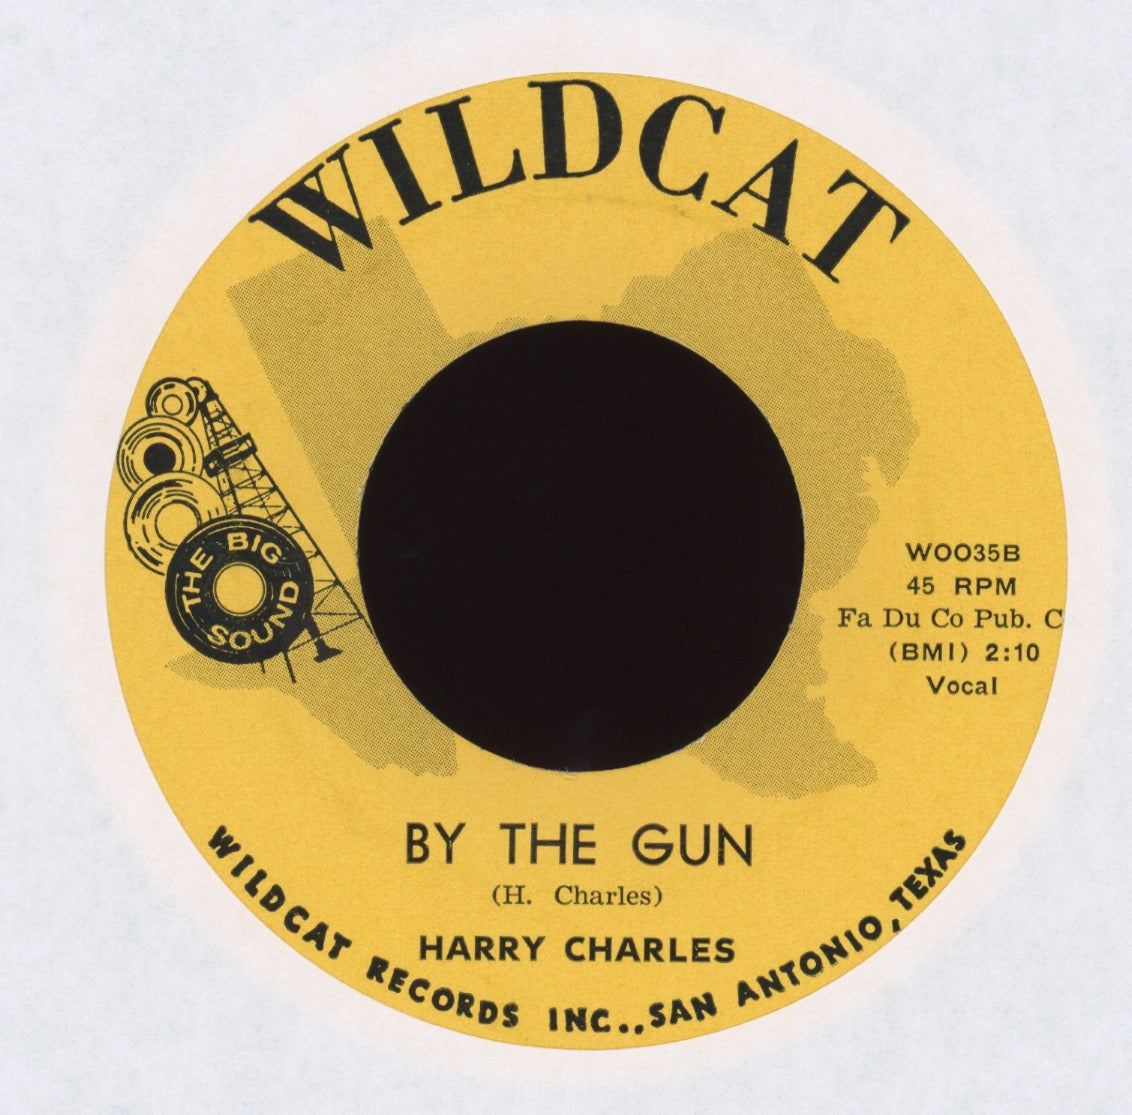 Harry Charles - By The Gun on Wildcat